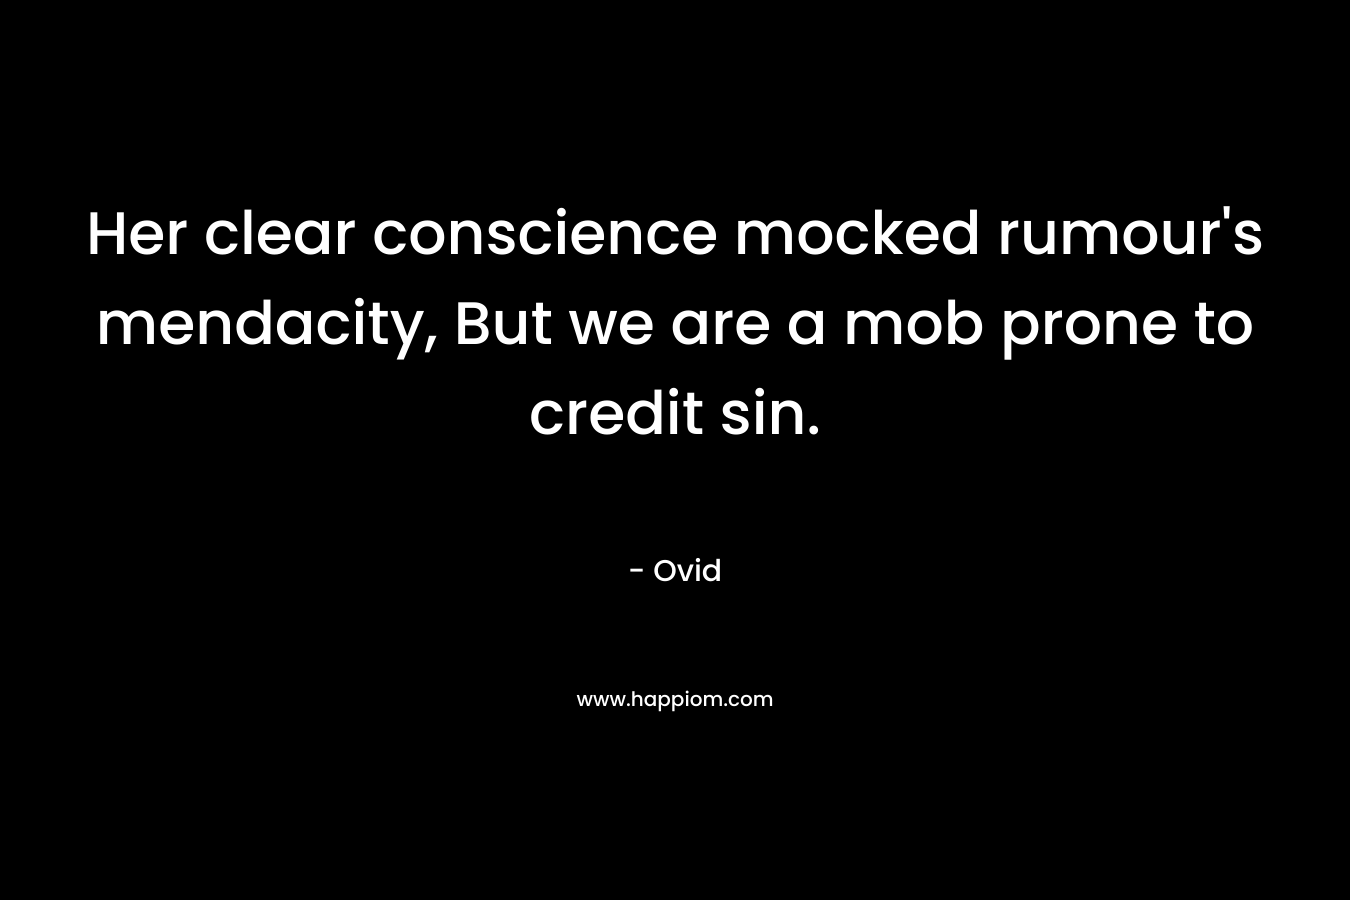 Her clear conscience mocked rumour’s mendacity, But we are a mob prone to credit sin. – Ovid